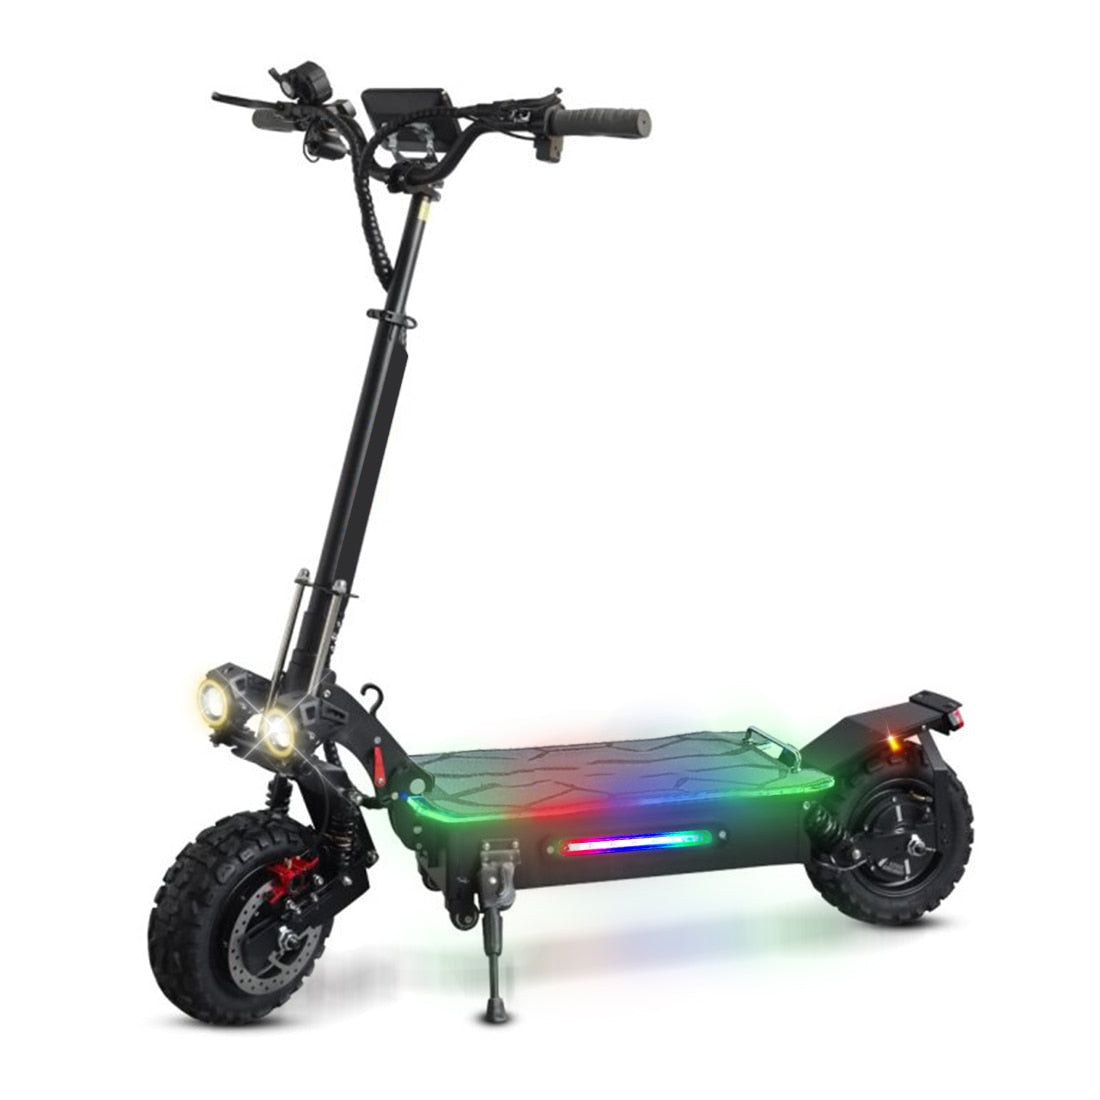 5600W Dual Motor Electric Scooter 60V 27AH 80KM/H Max Speed 11 inch off-road Tires Adult E-Scooter Powerful Electric Scooter